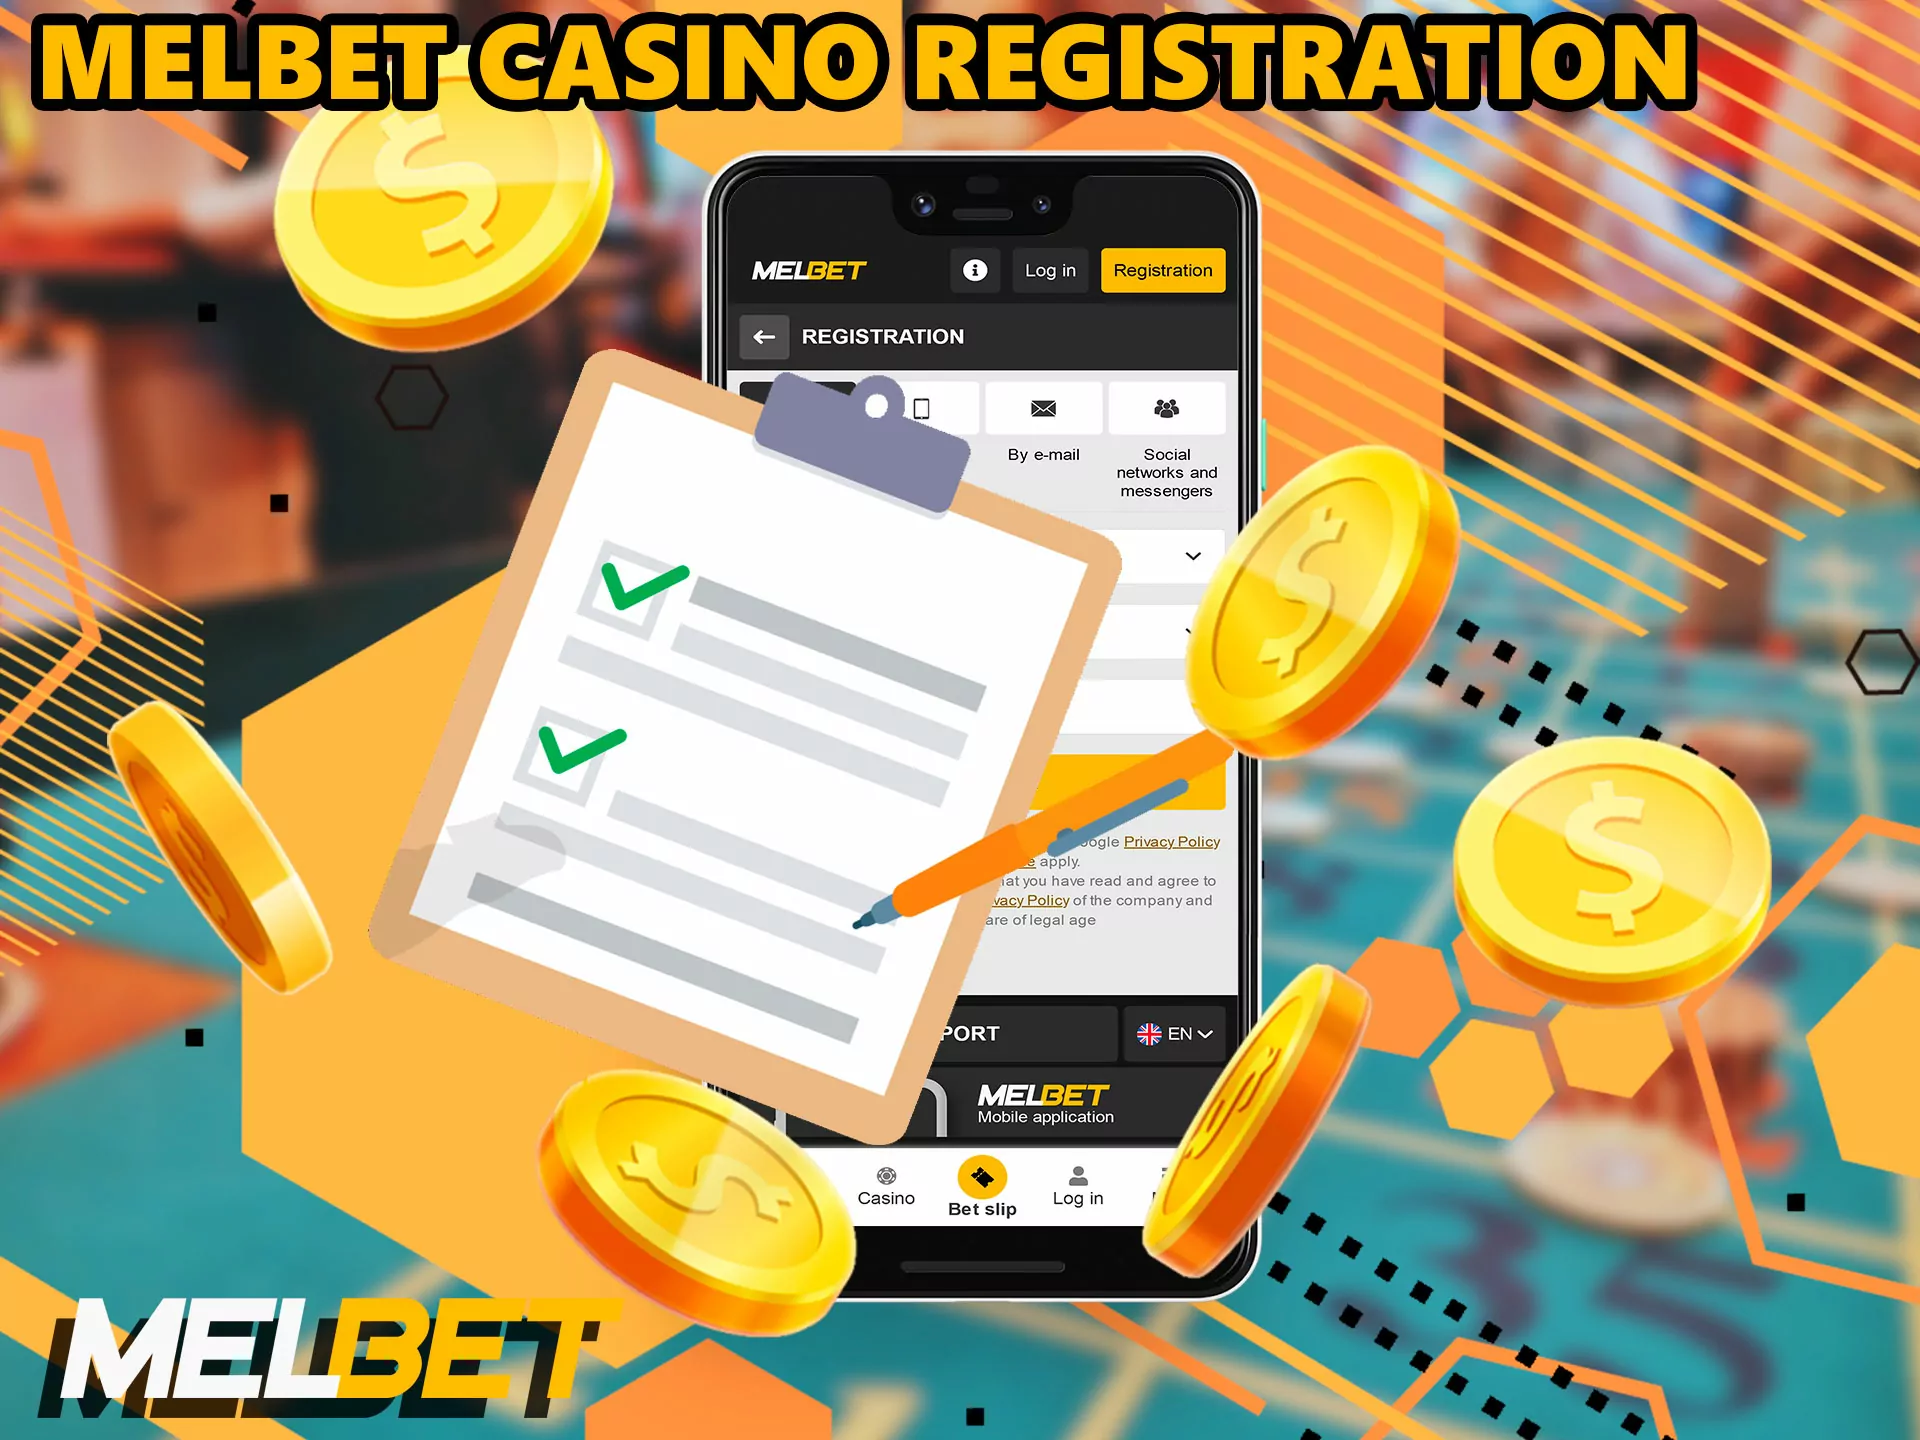 You need to create an account, this is necessary to start playing at the casino, this will help you: Melbet casino review.